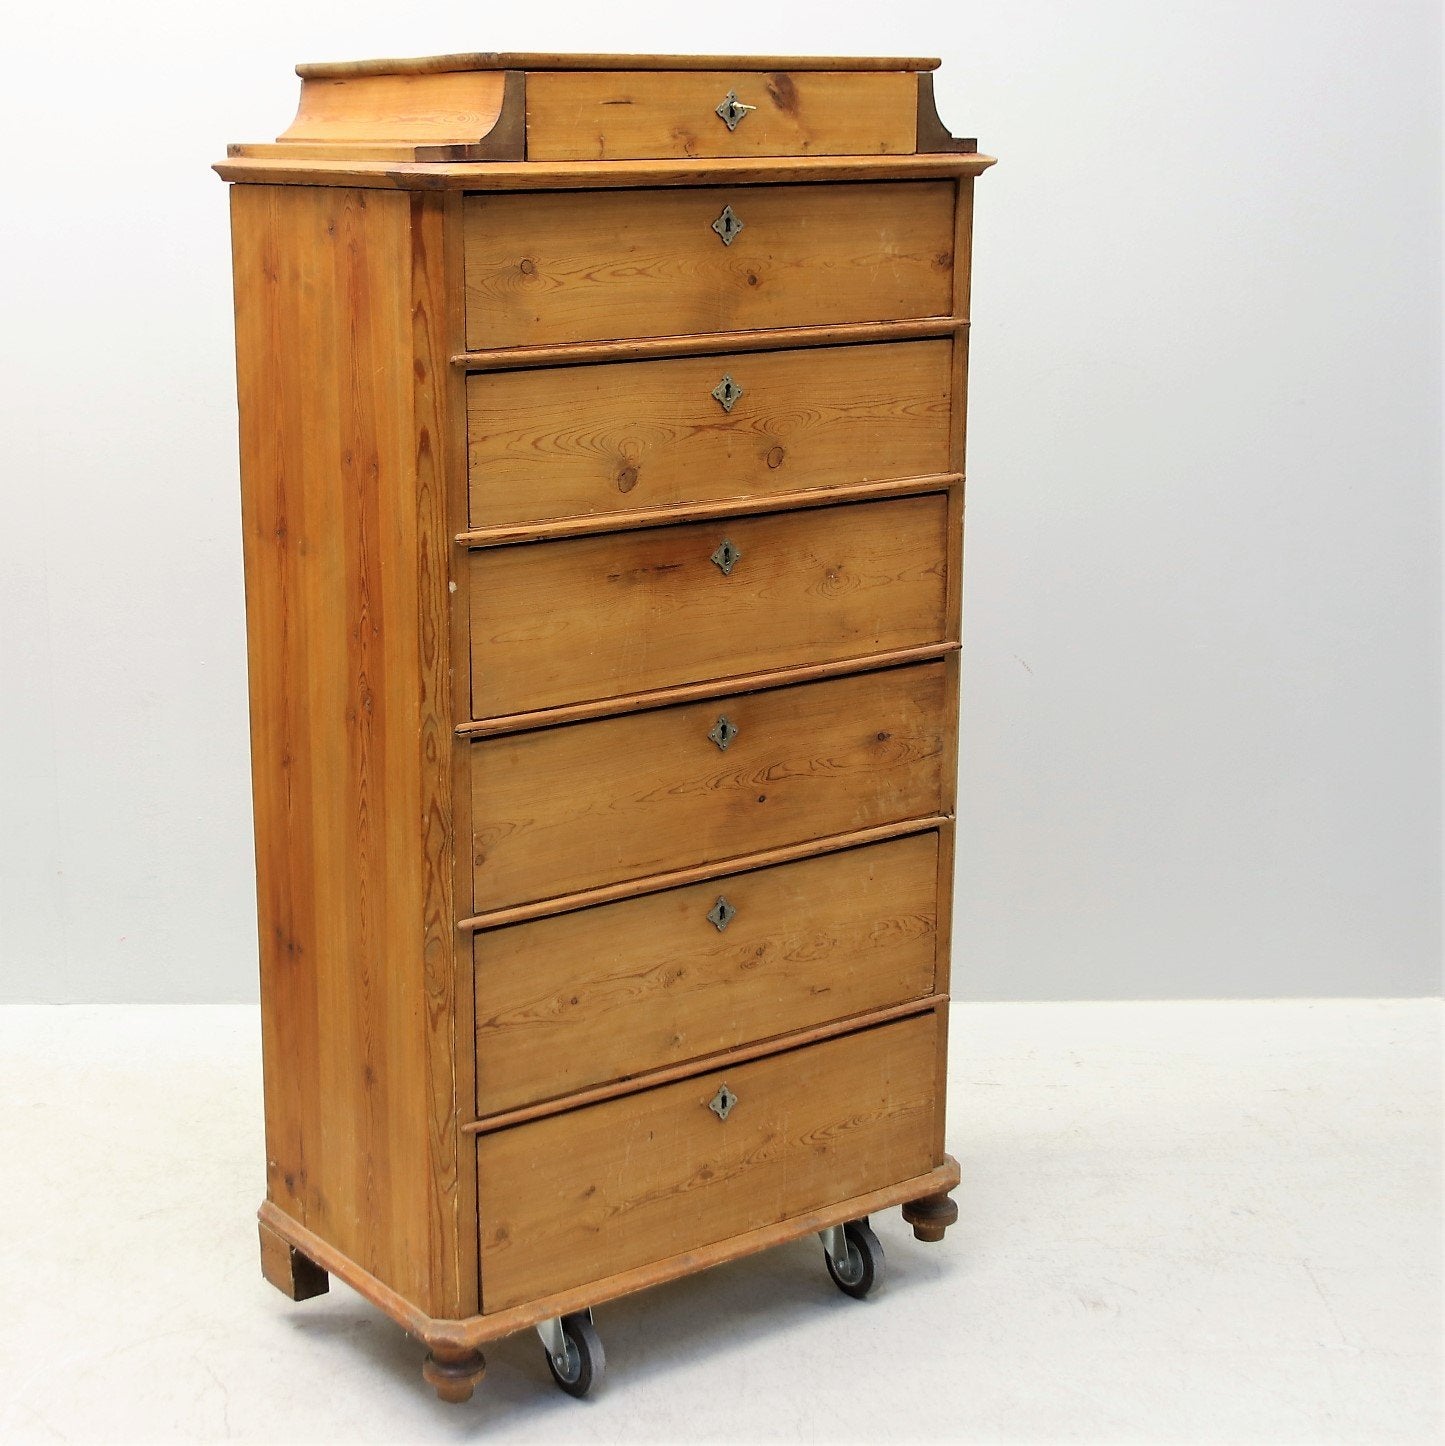 1800s Swedish Unfinished Pine Tall Chest of Drawers with Original Brass Hardware